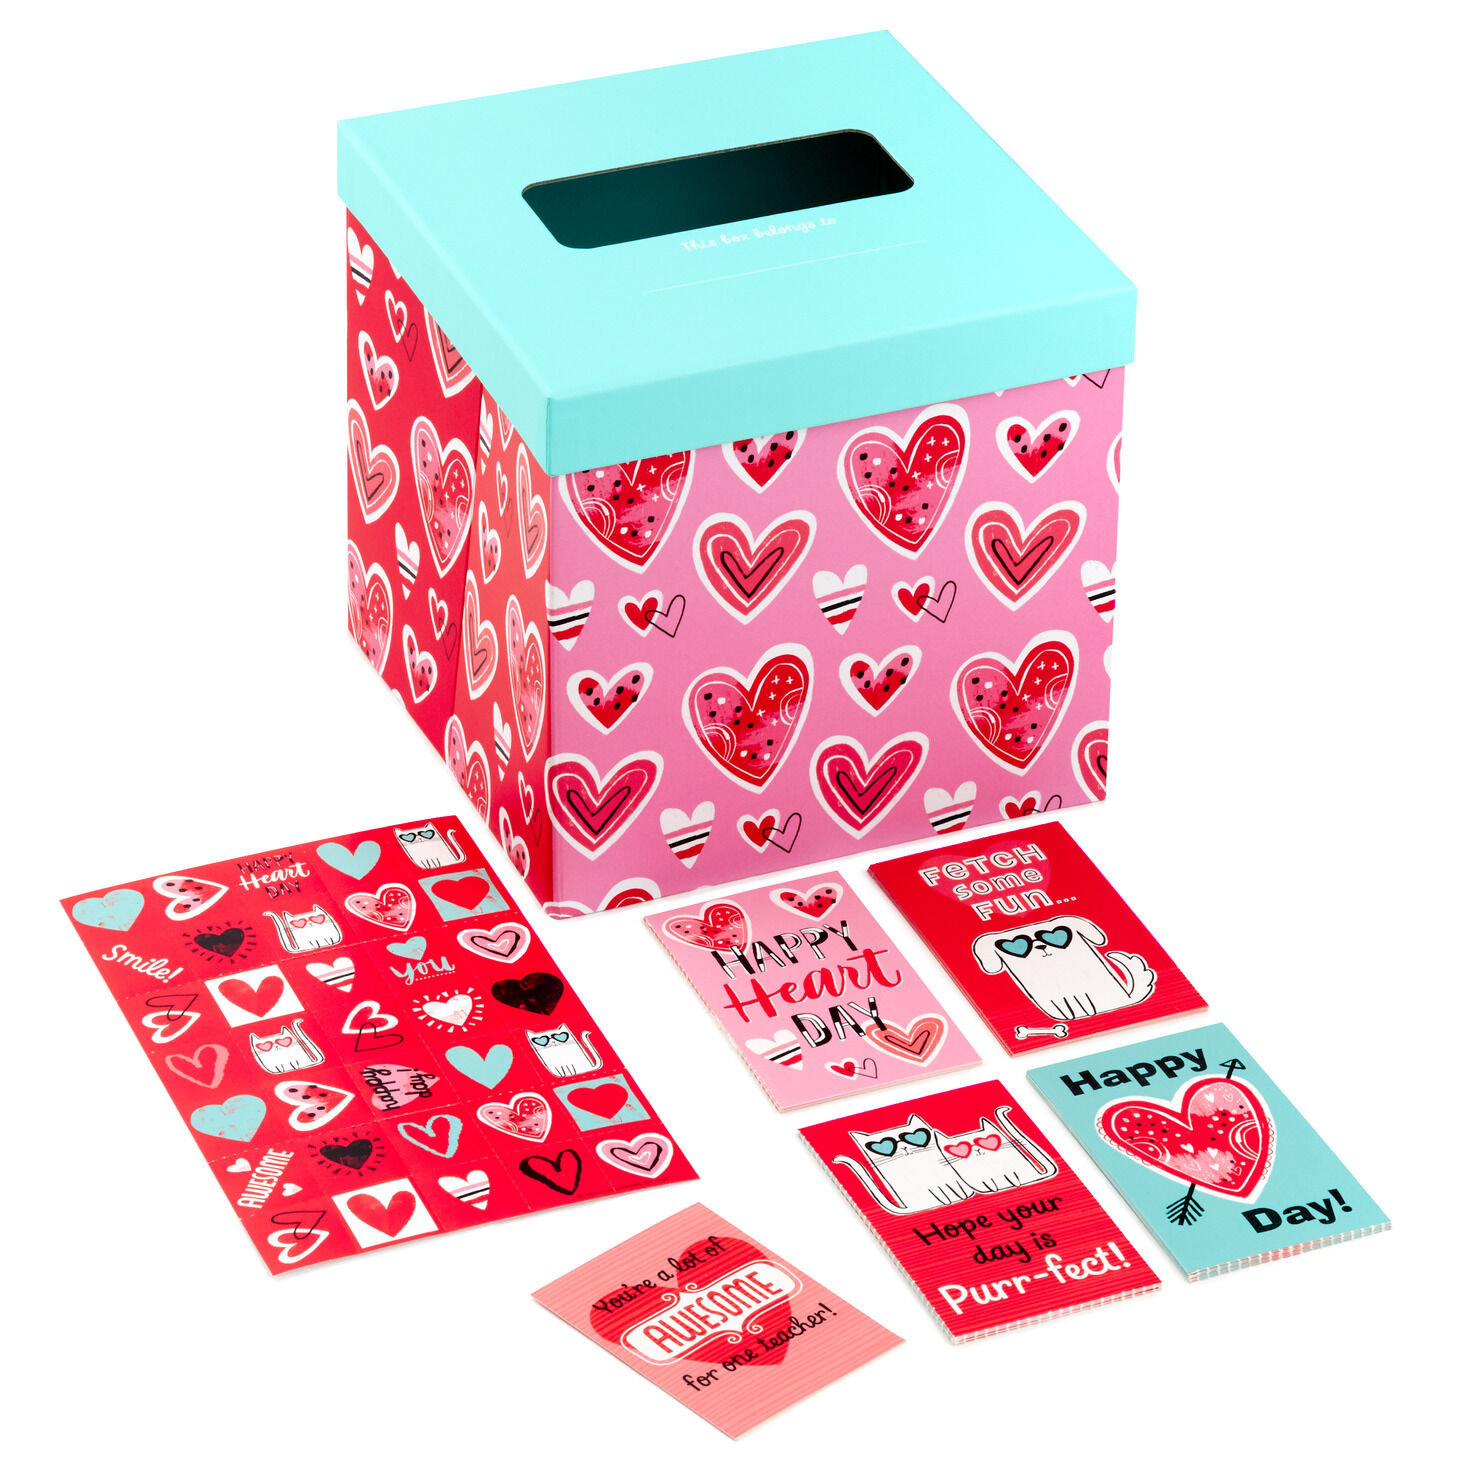 Hallmark Kids Pokémon Valentines Day Cards and Stickers Assortment 24 Classroom Cards with Envelopes 